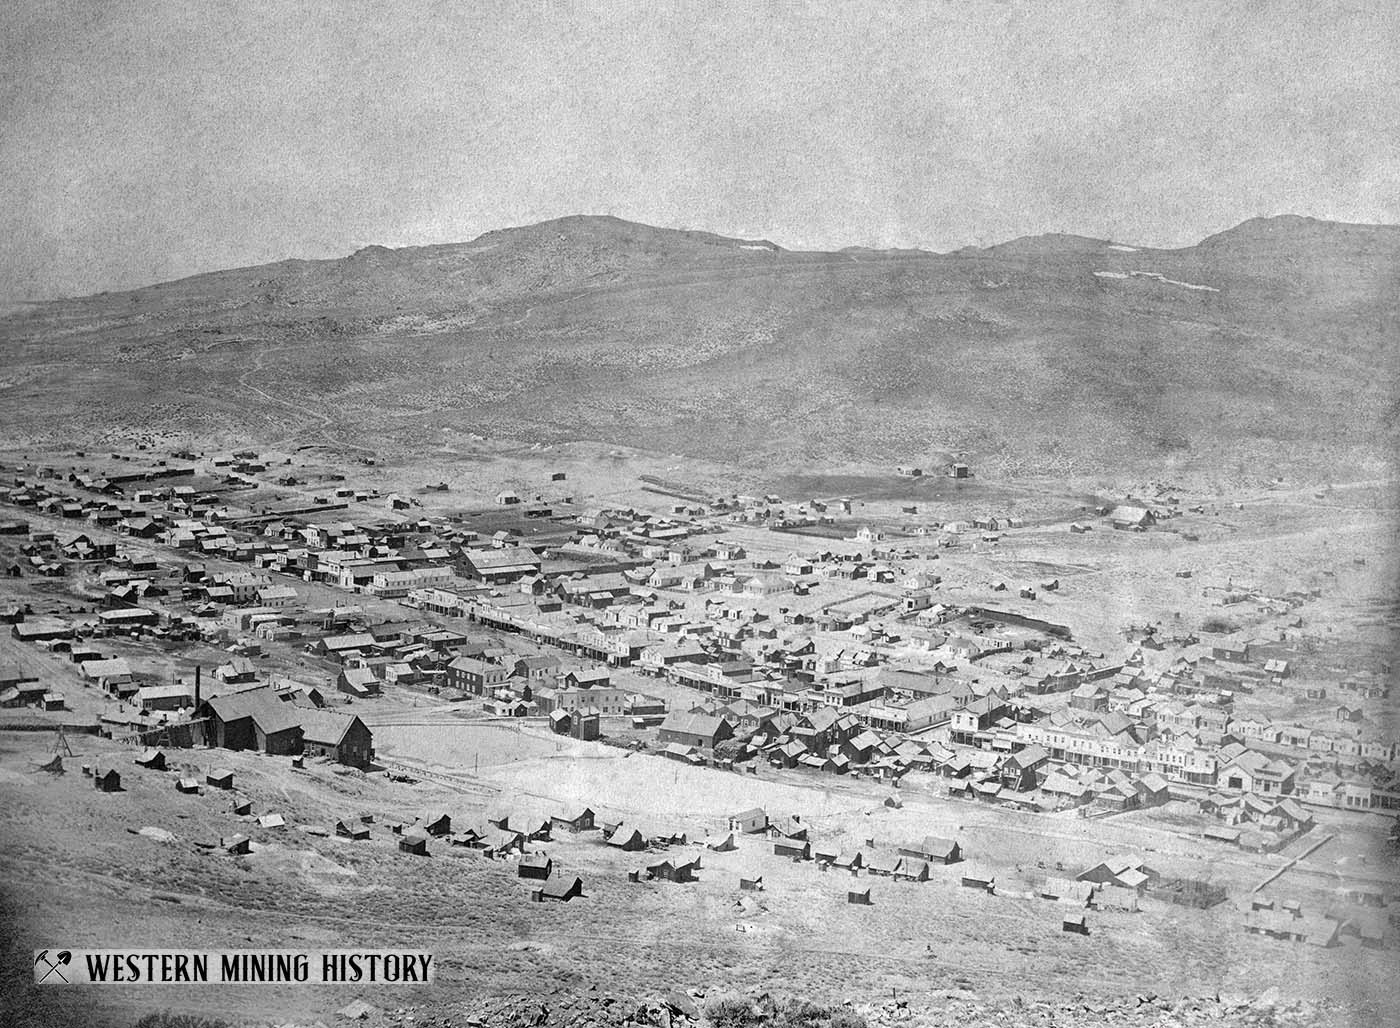 View of Bodie, California in 1880